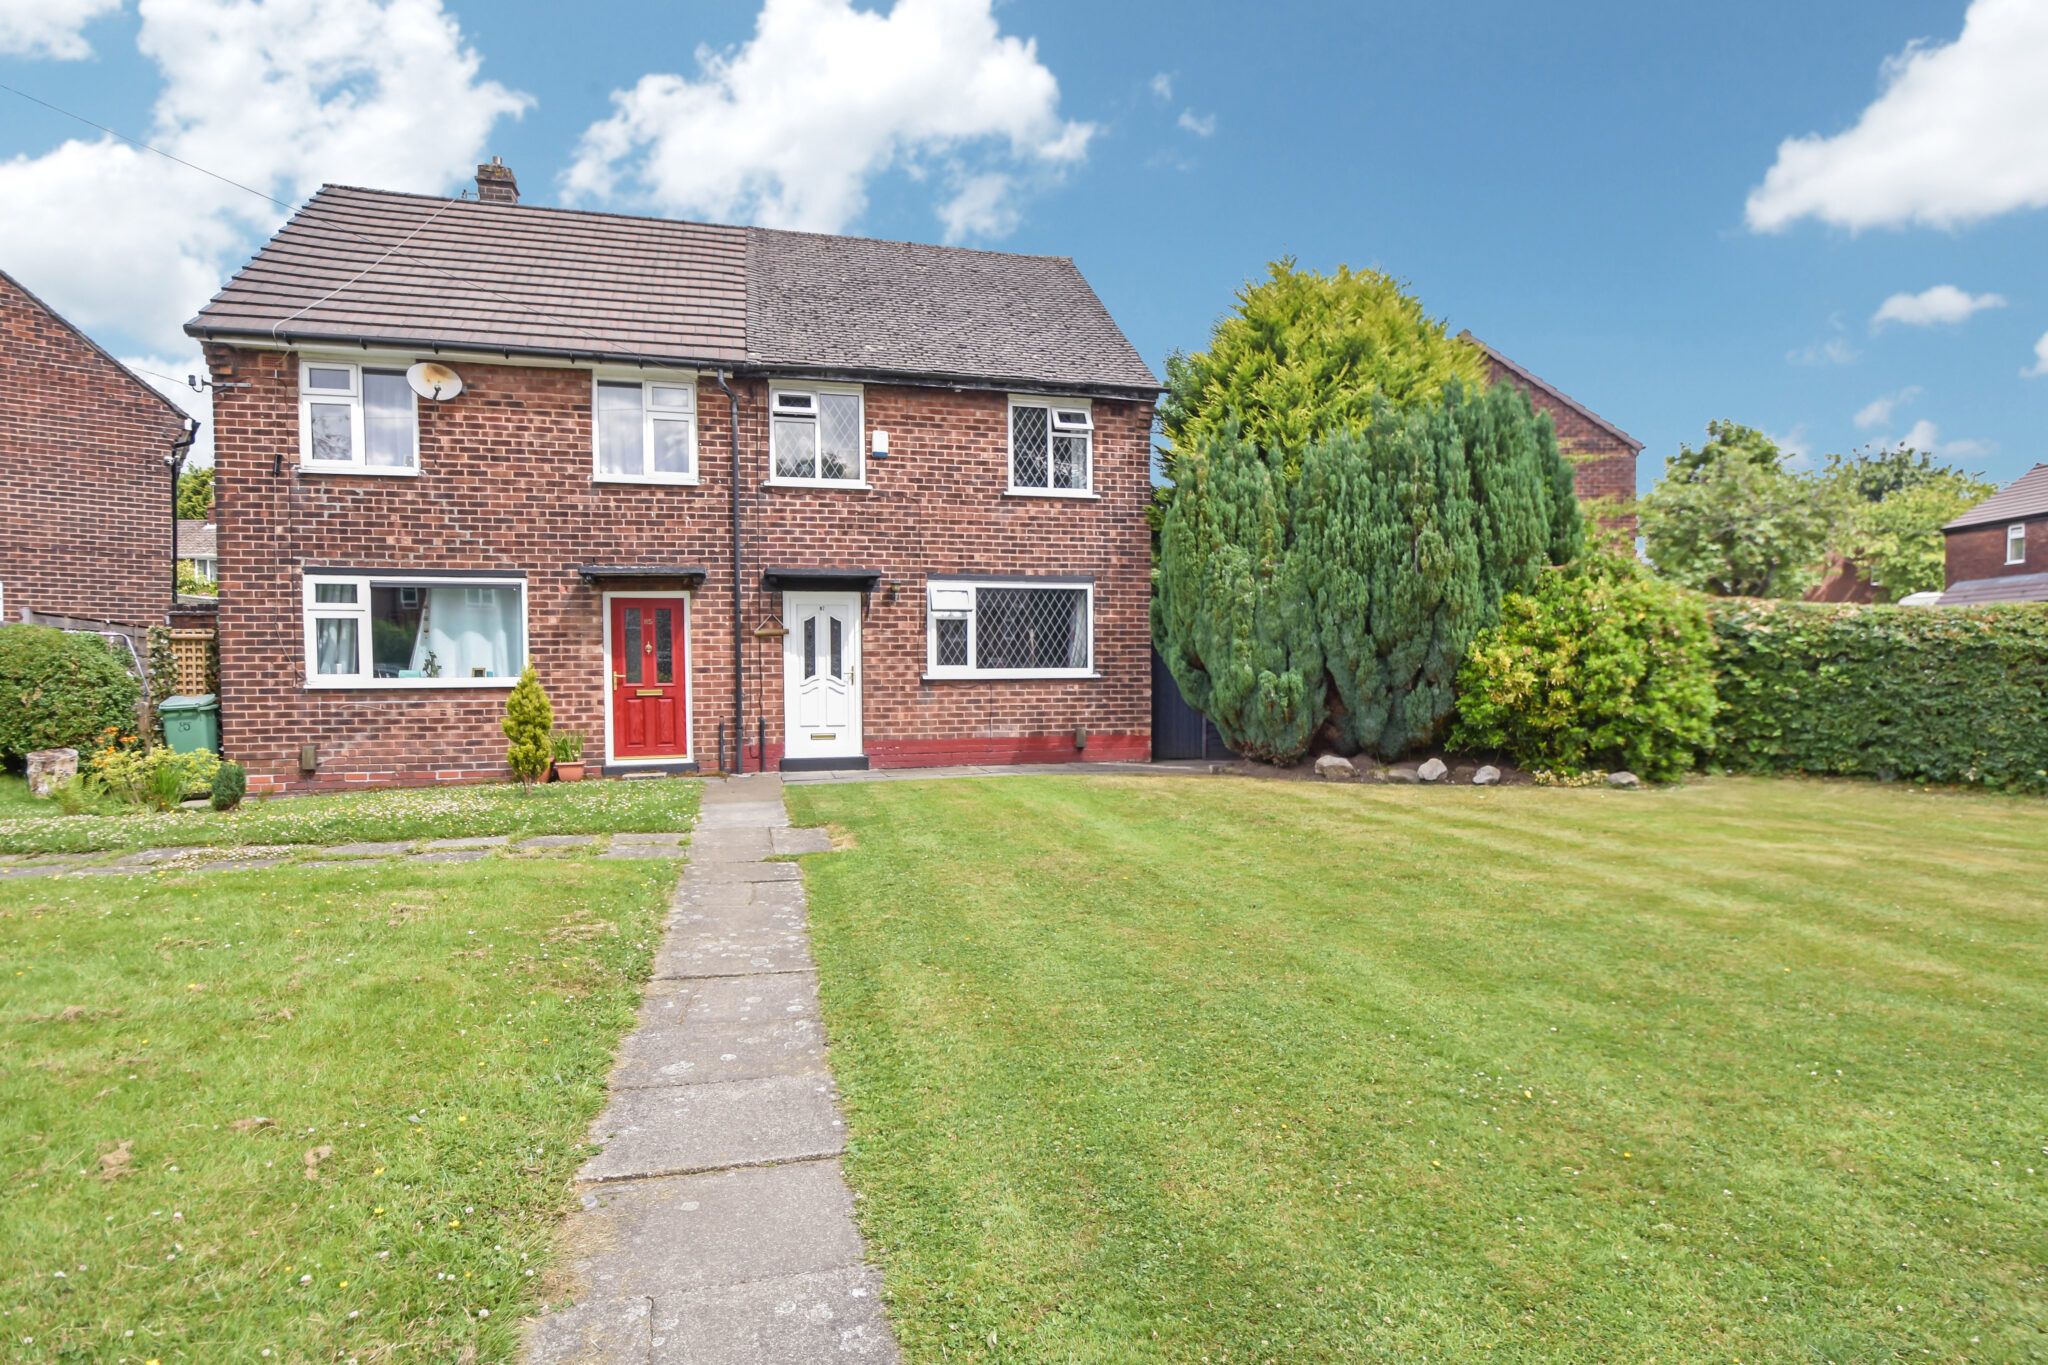 Rufford Drive, Whitefield, Manchester, Manchester, M45 8PN